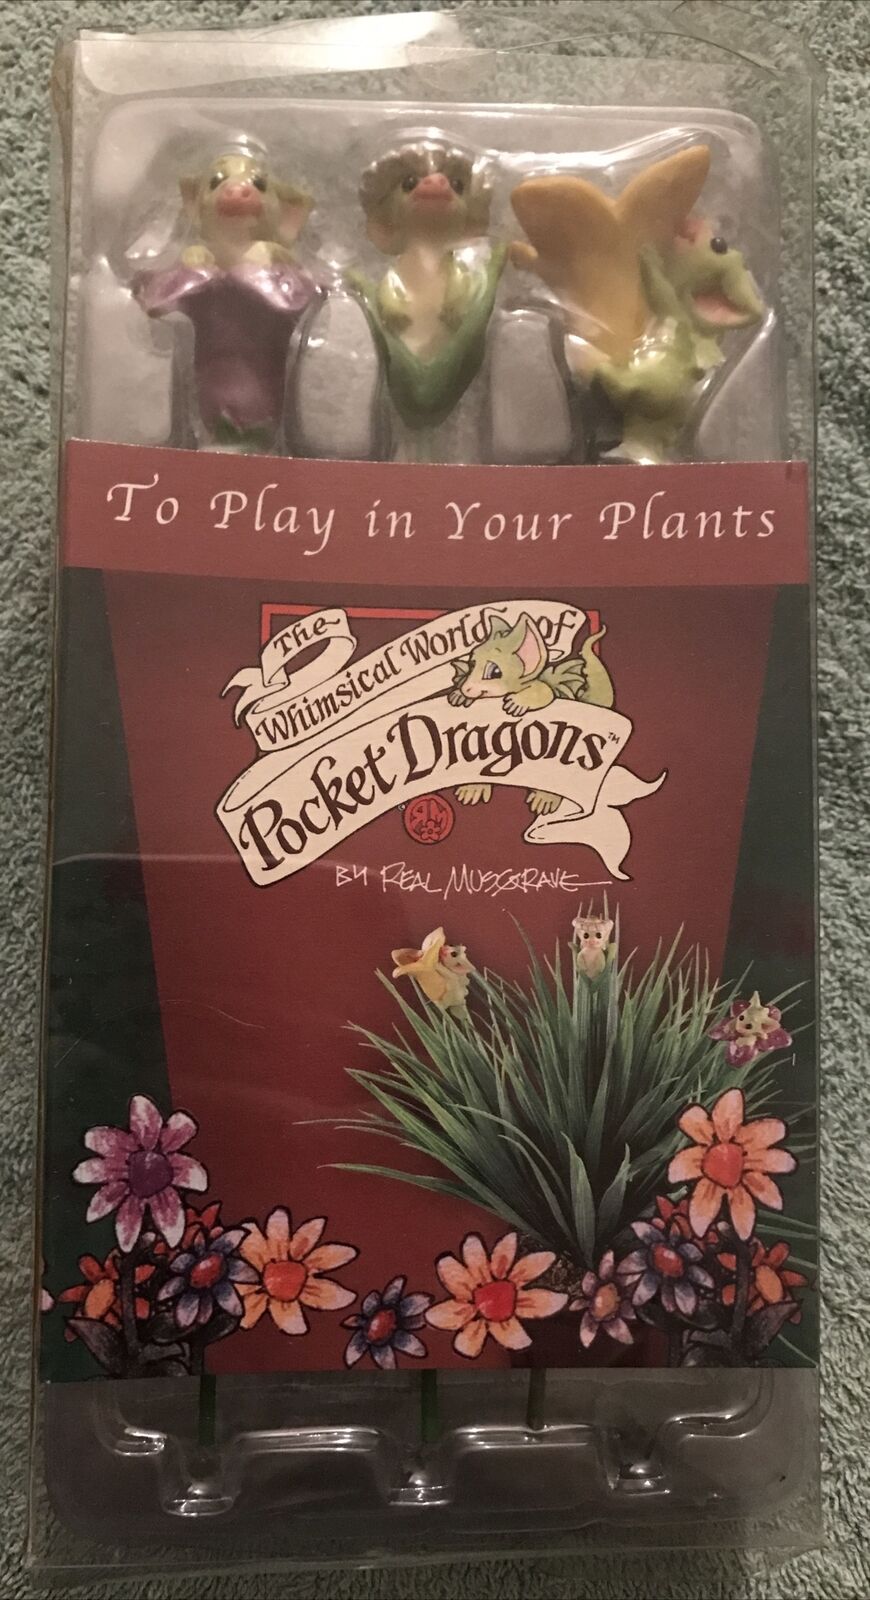 Whimsical World Of Pocket Dragons The Garden Collection To Play In Plants Dragon